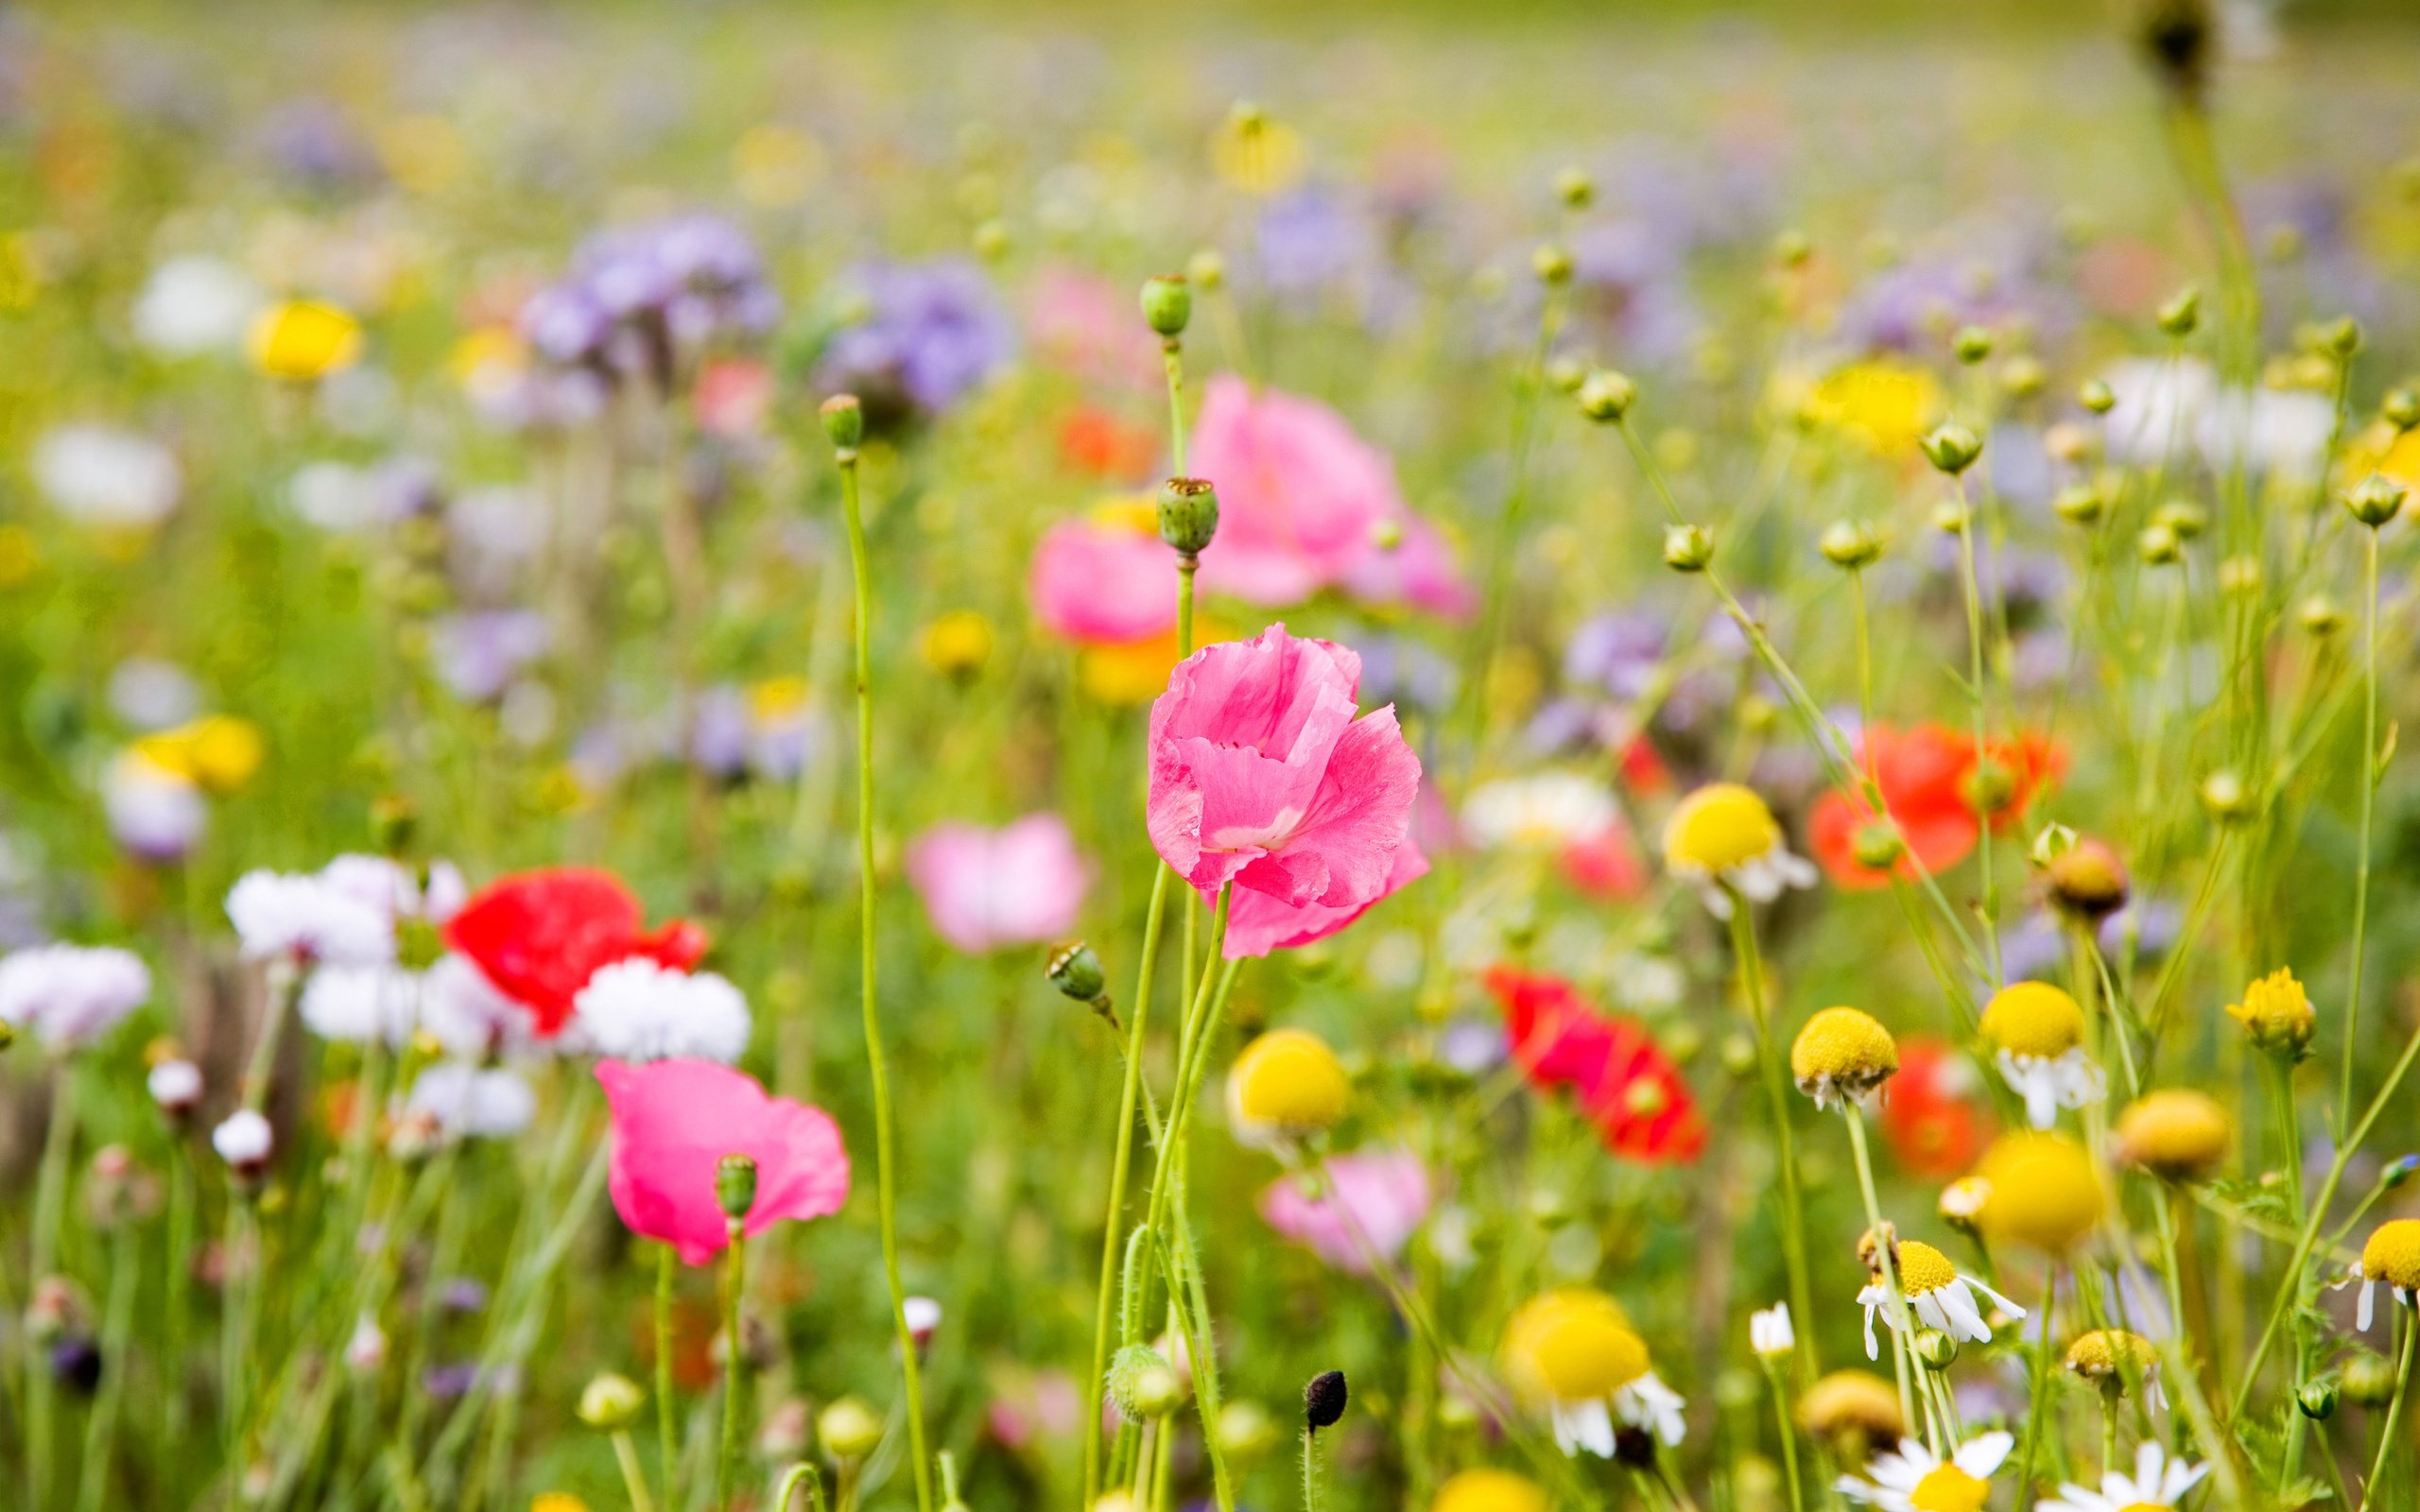 Summer Meadow Colorful Flowers Wallpapers   2560x1600   886374 2560x1600